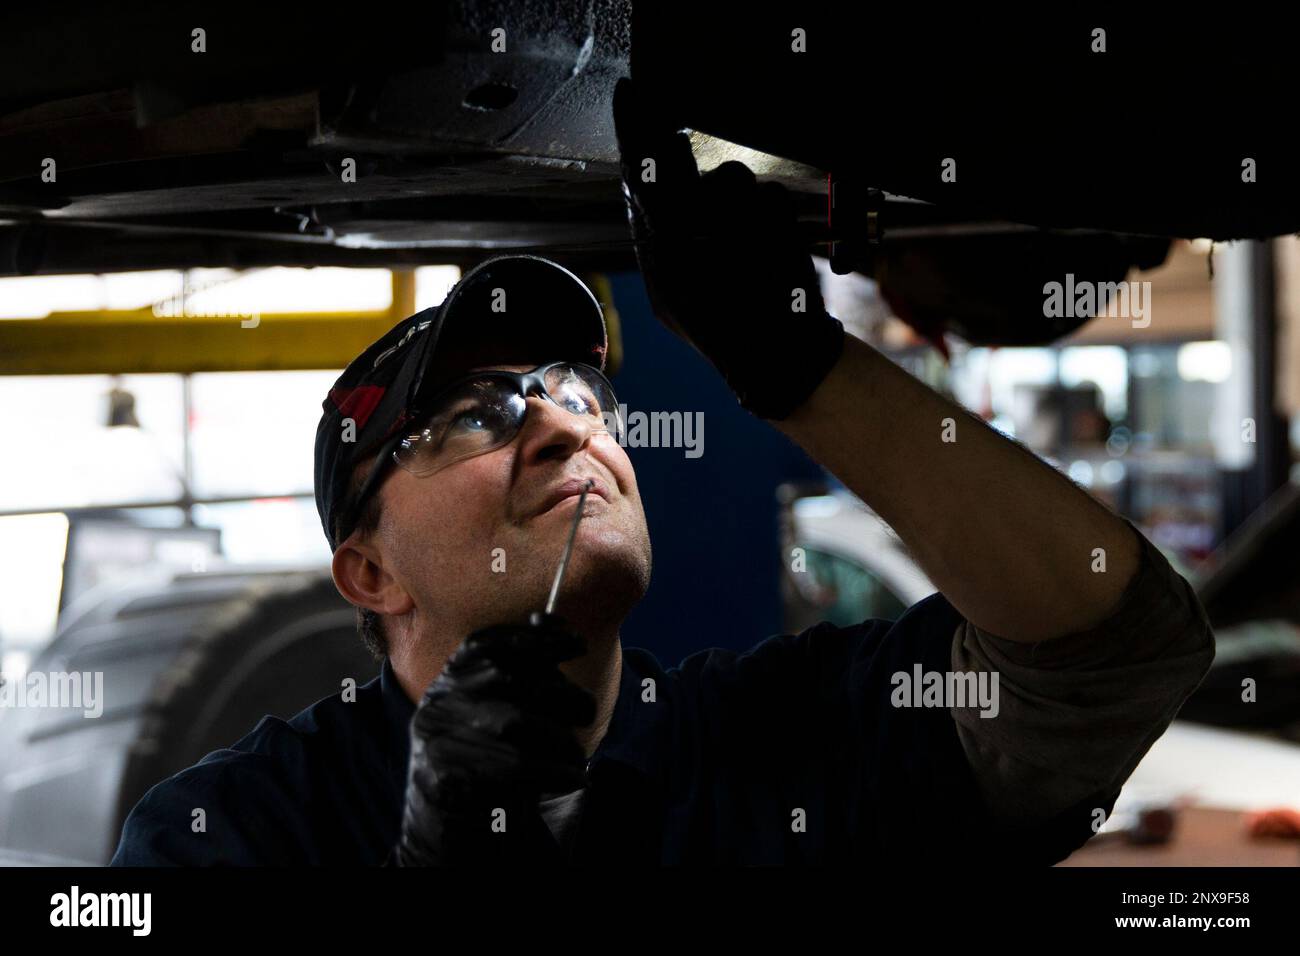 https://c8.alamy.com/compfr/2nx9f58/advance-for-weekend-editions-april-21-22-in-this-tuesday-april-10-2018-photo-auto-technician-john-buttner-inspects-the-undercarriage-of-a-car-at-lift-garage-in-minneapolis-looking-at-a-quote-for-a-repair-at-a-for-profit-shop-this-would-have-been-1500-or-2000-here-550-insane-buttner-said-after-a-career-in-ministry-and-social-work-lift-garage-founder-cathy-heying-went-to-back-to-school-to-become-a-mechanic-evan-frost-minnesota-public-radio-via-ap-2nx9f58.jpg